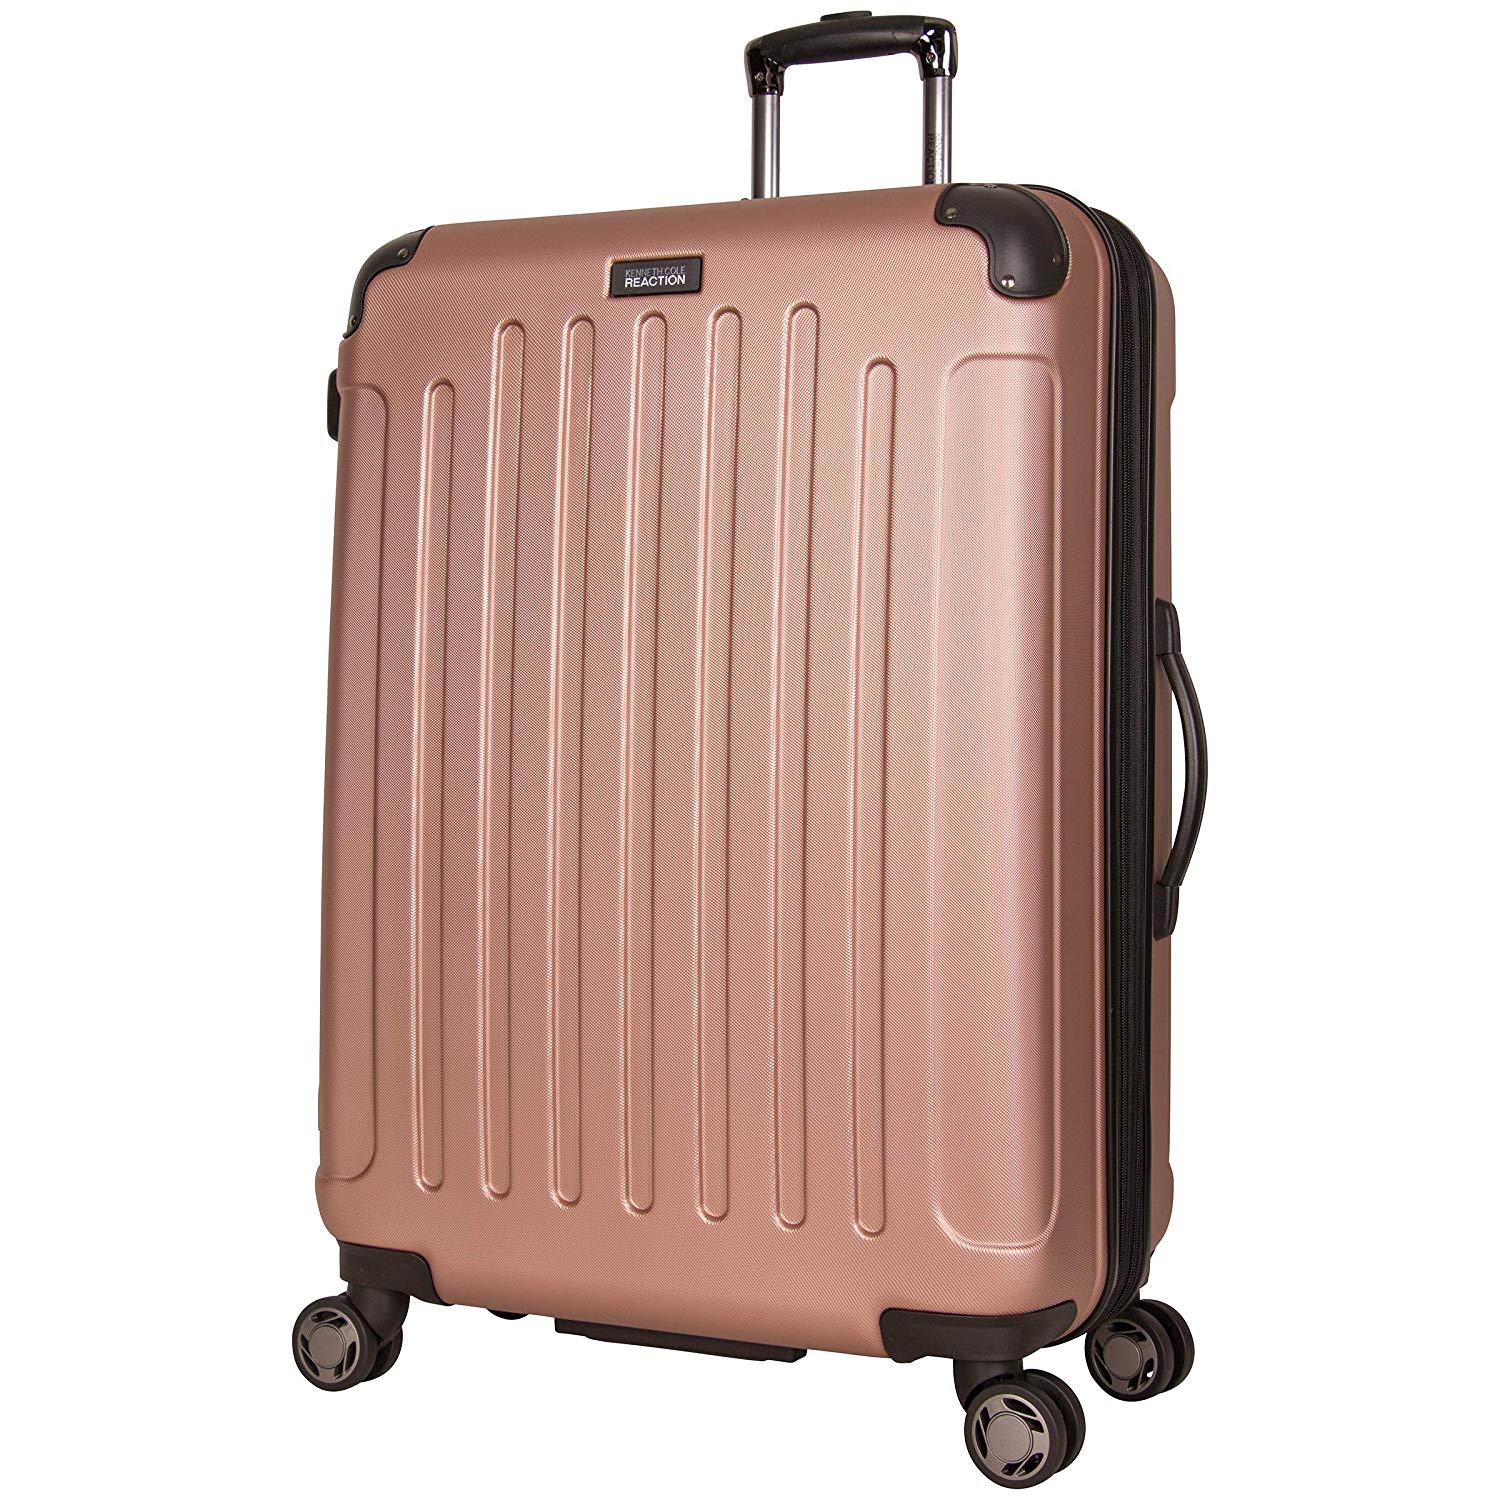 Top 10 Best Hardside Luggage in 2021 Reviews | Guide